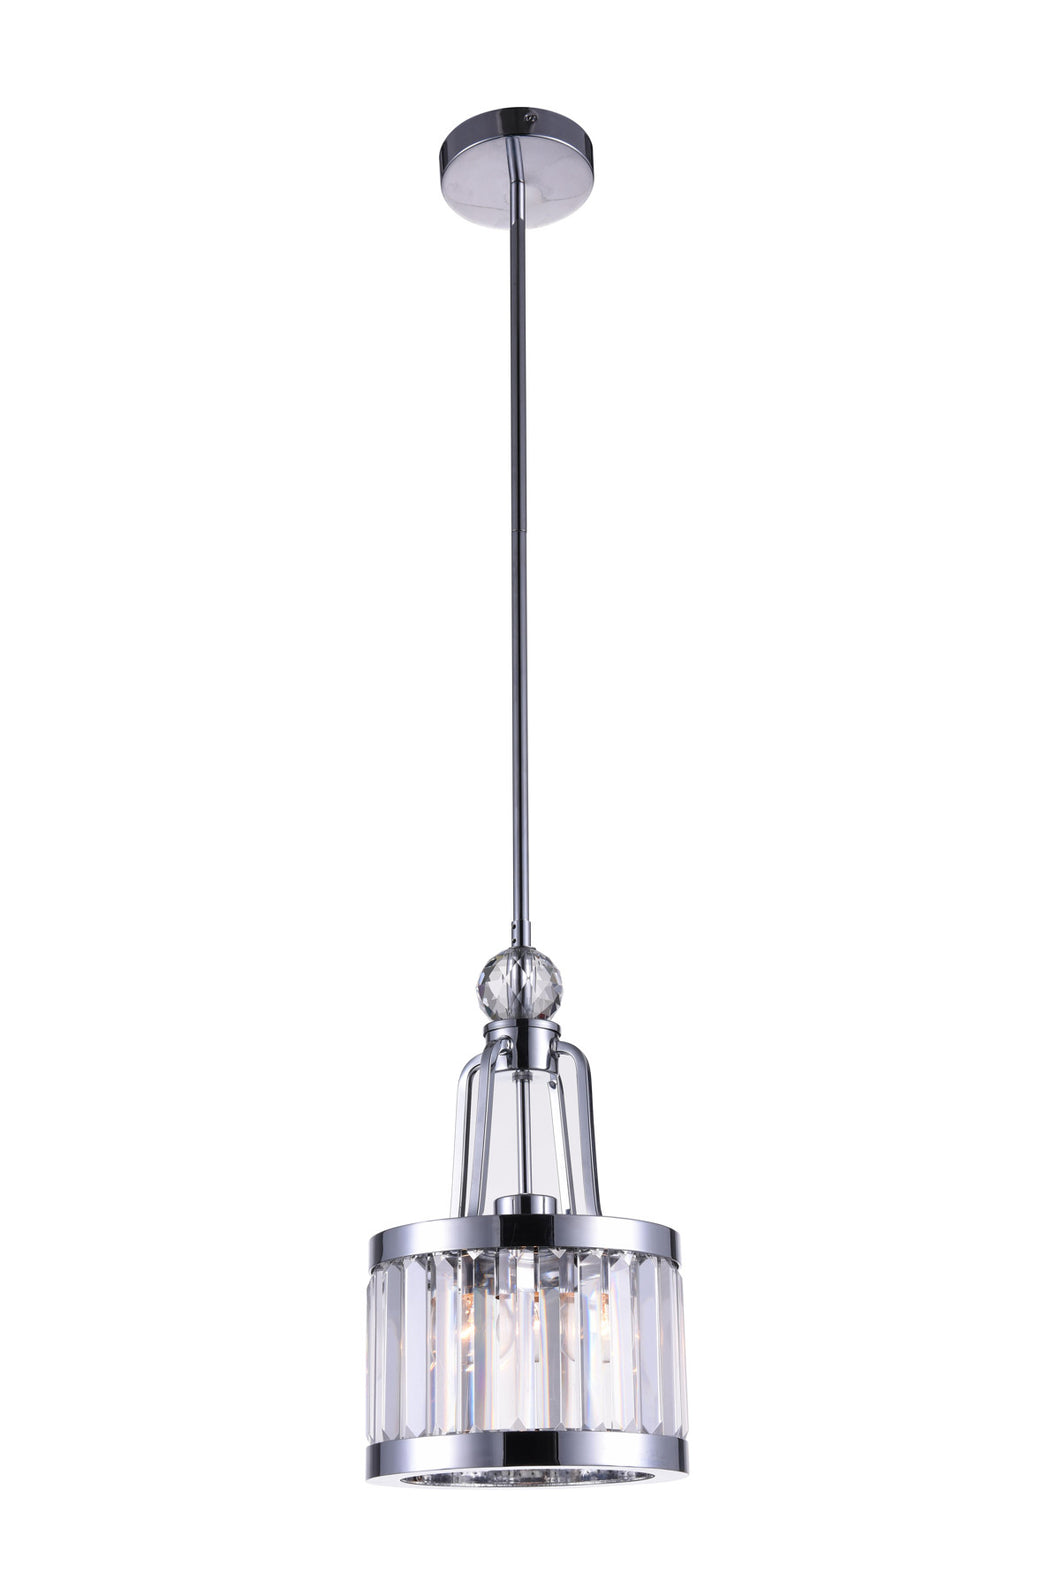 1 Light Drum Shade Mini Chandelier with Chrome finish